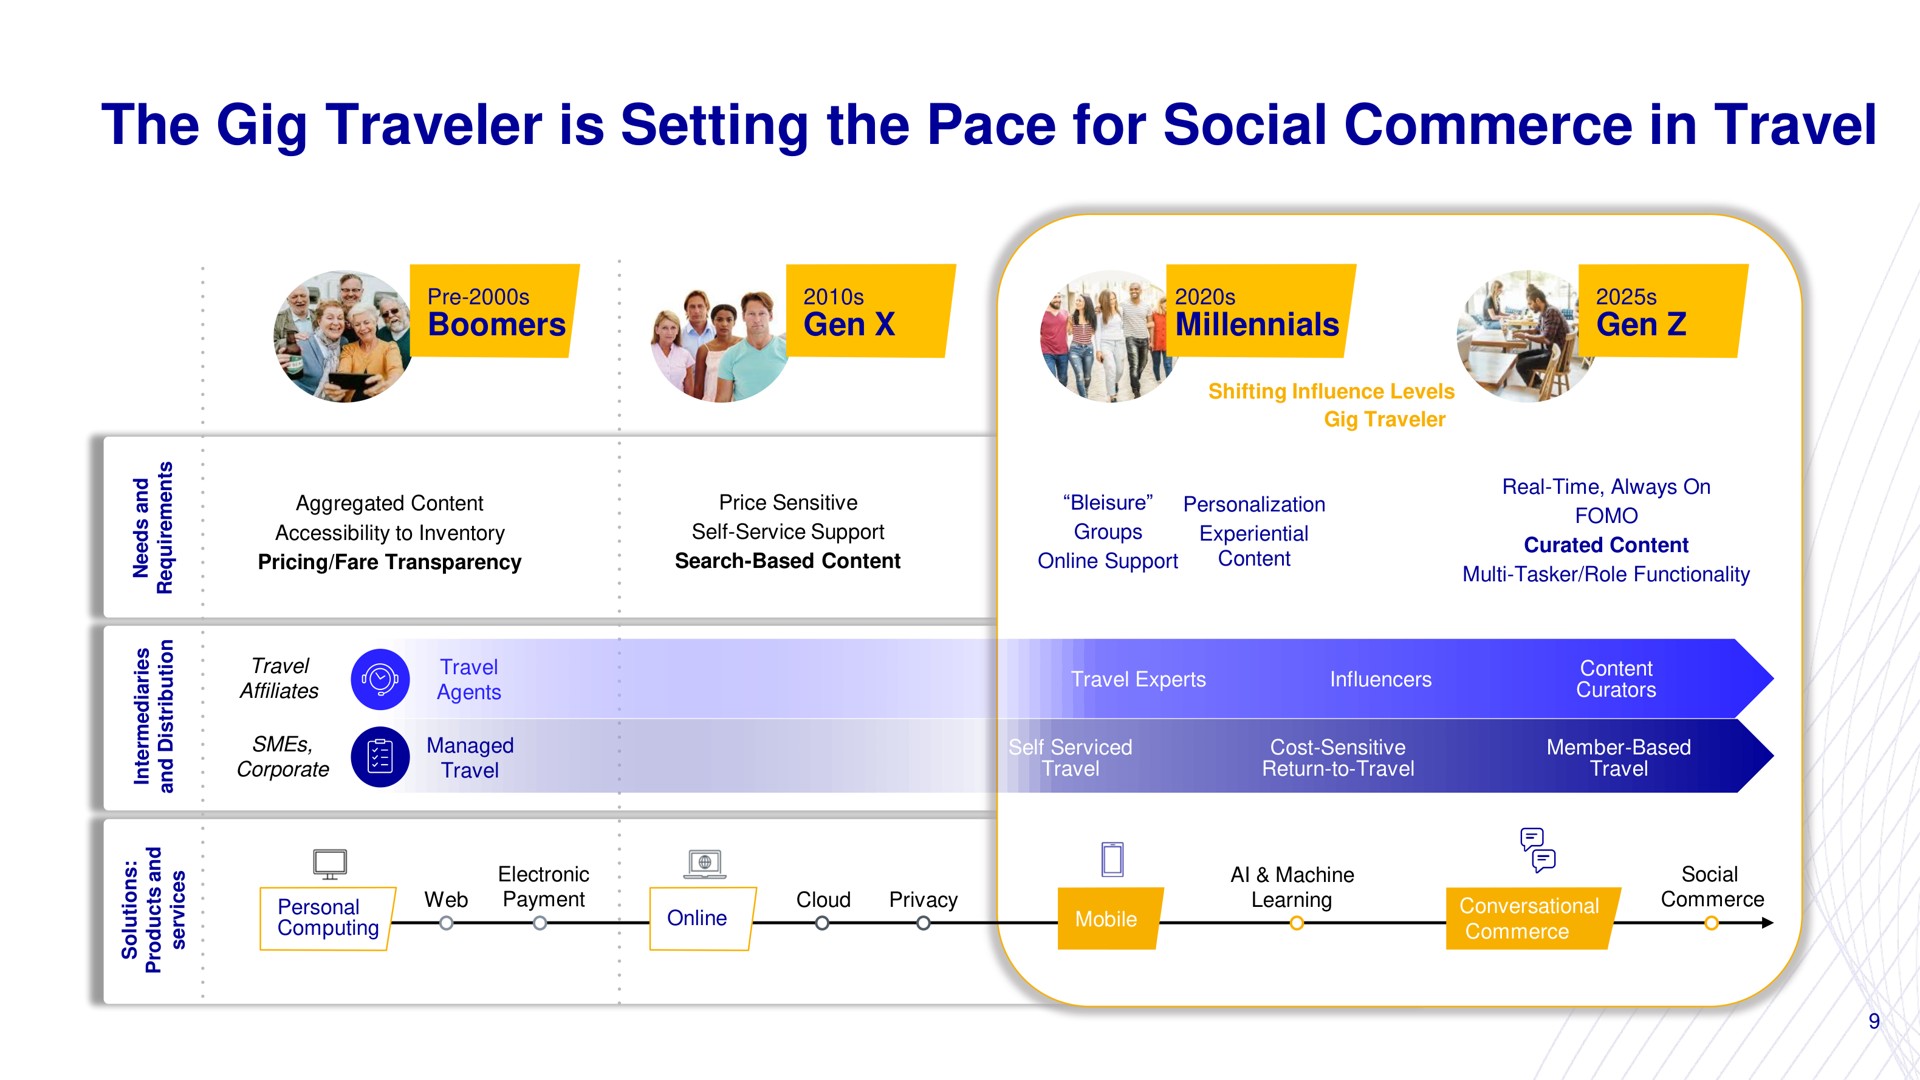 the gig traveler is setting the pace for social commerce in travel ais | Mondee